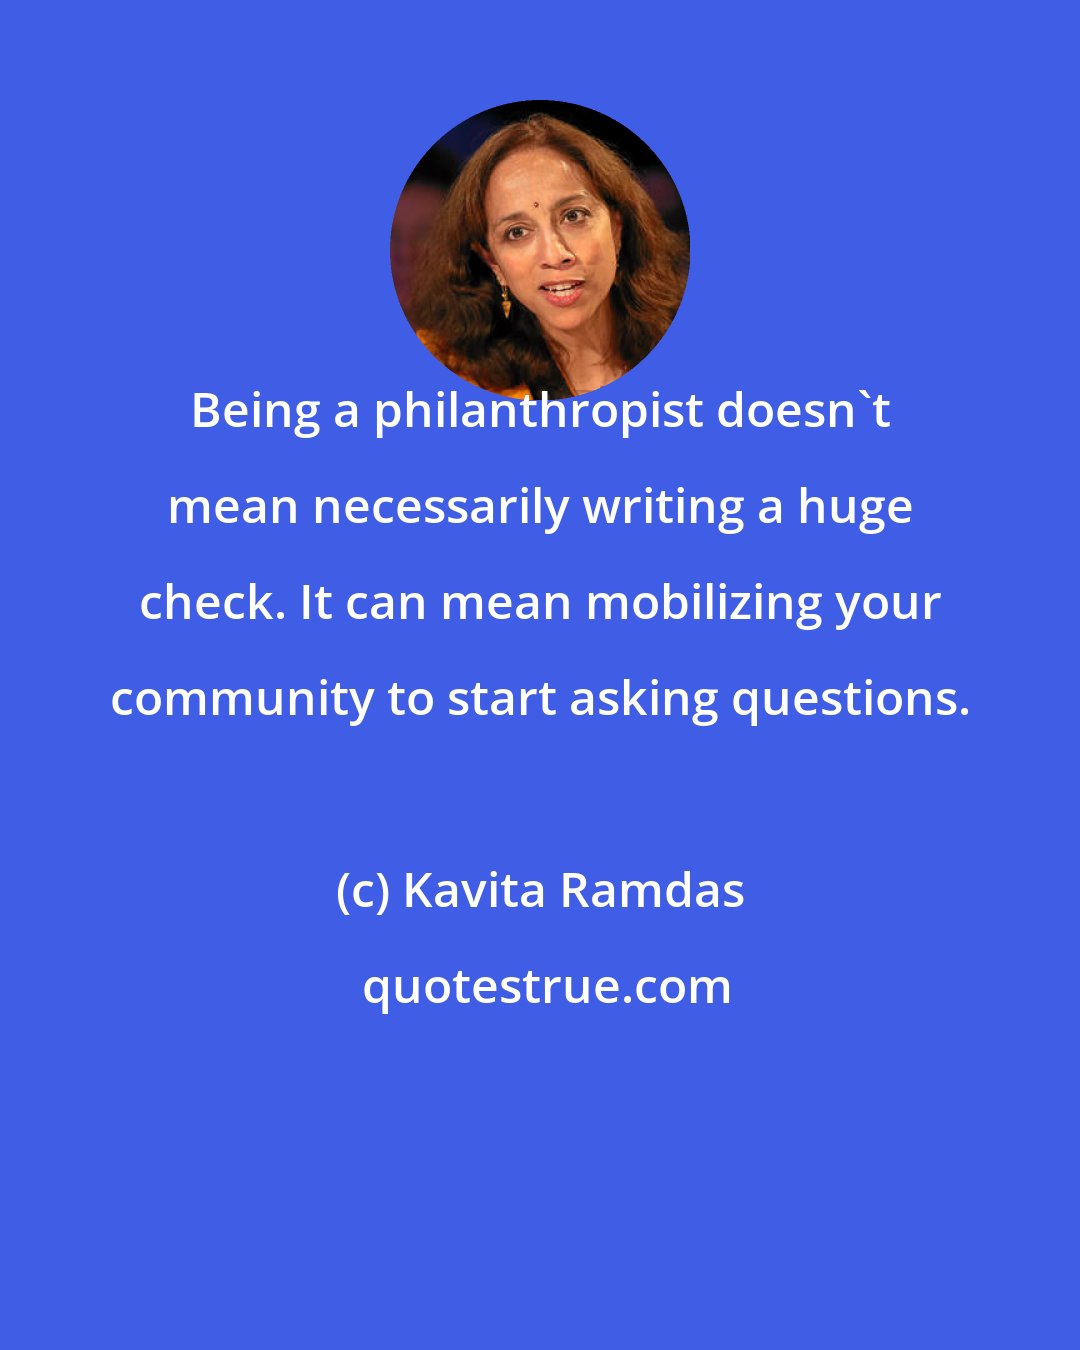 Kavita Ramdas: Being a philanthropist doesn't mean necessarily writing a huge check. It can mean mobilizing your community to start asking questions.